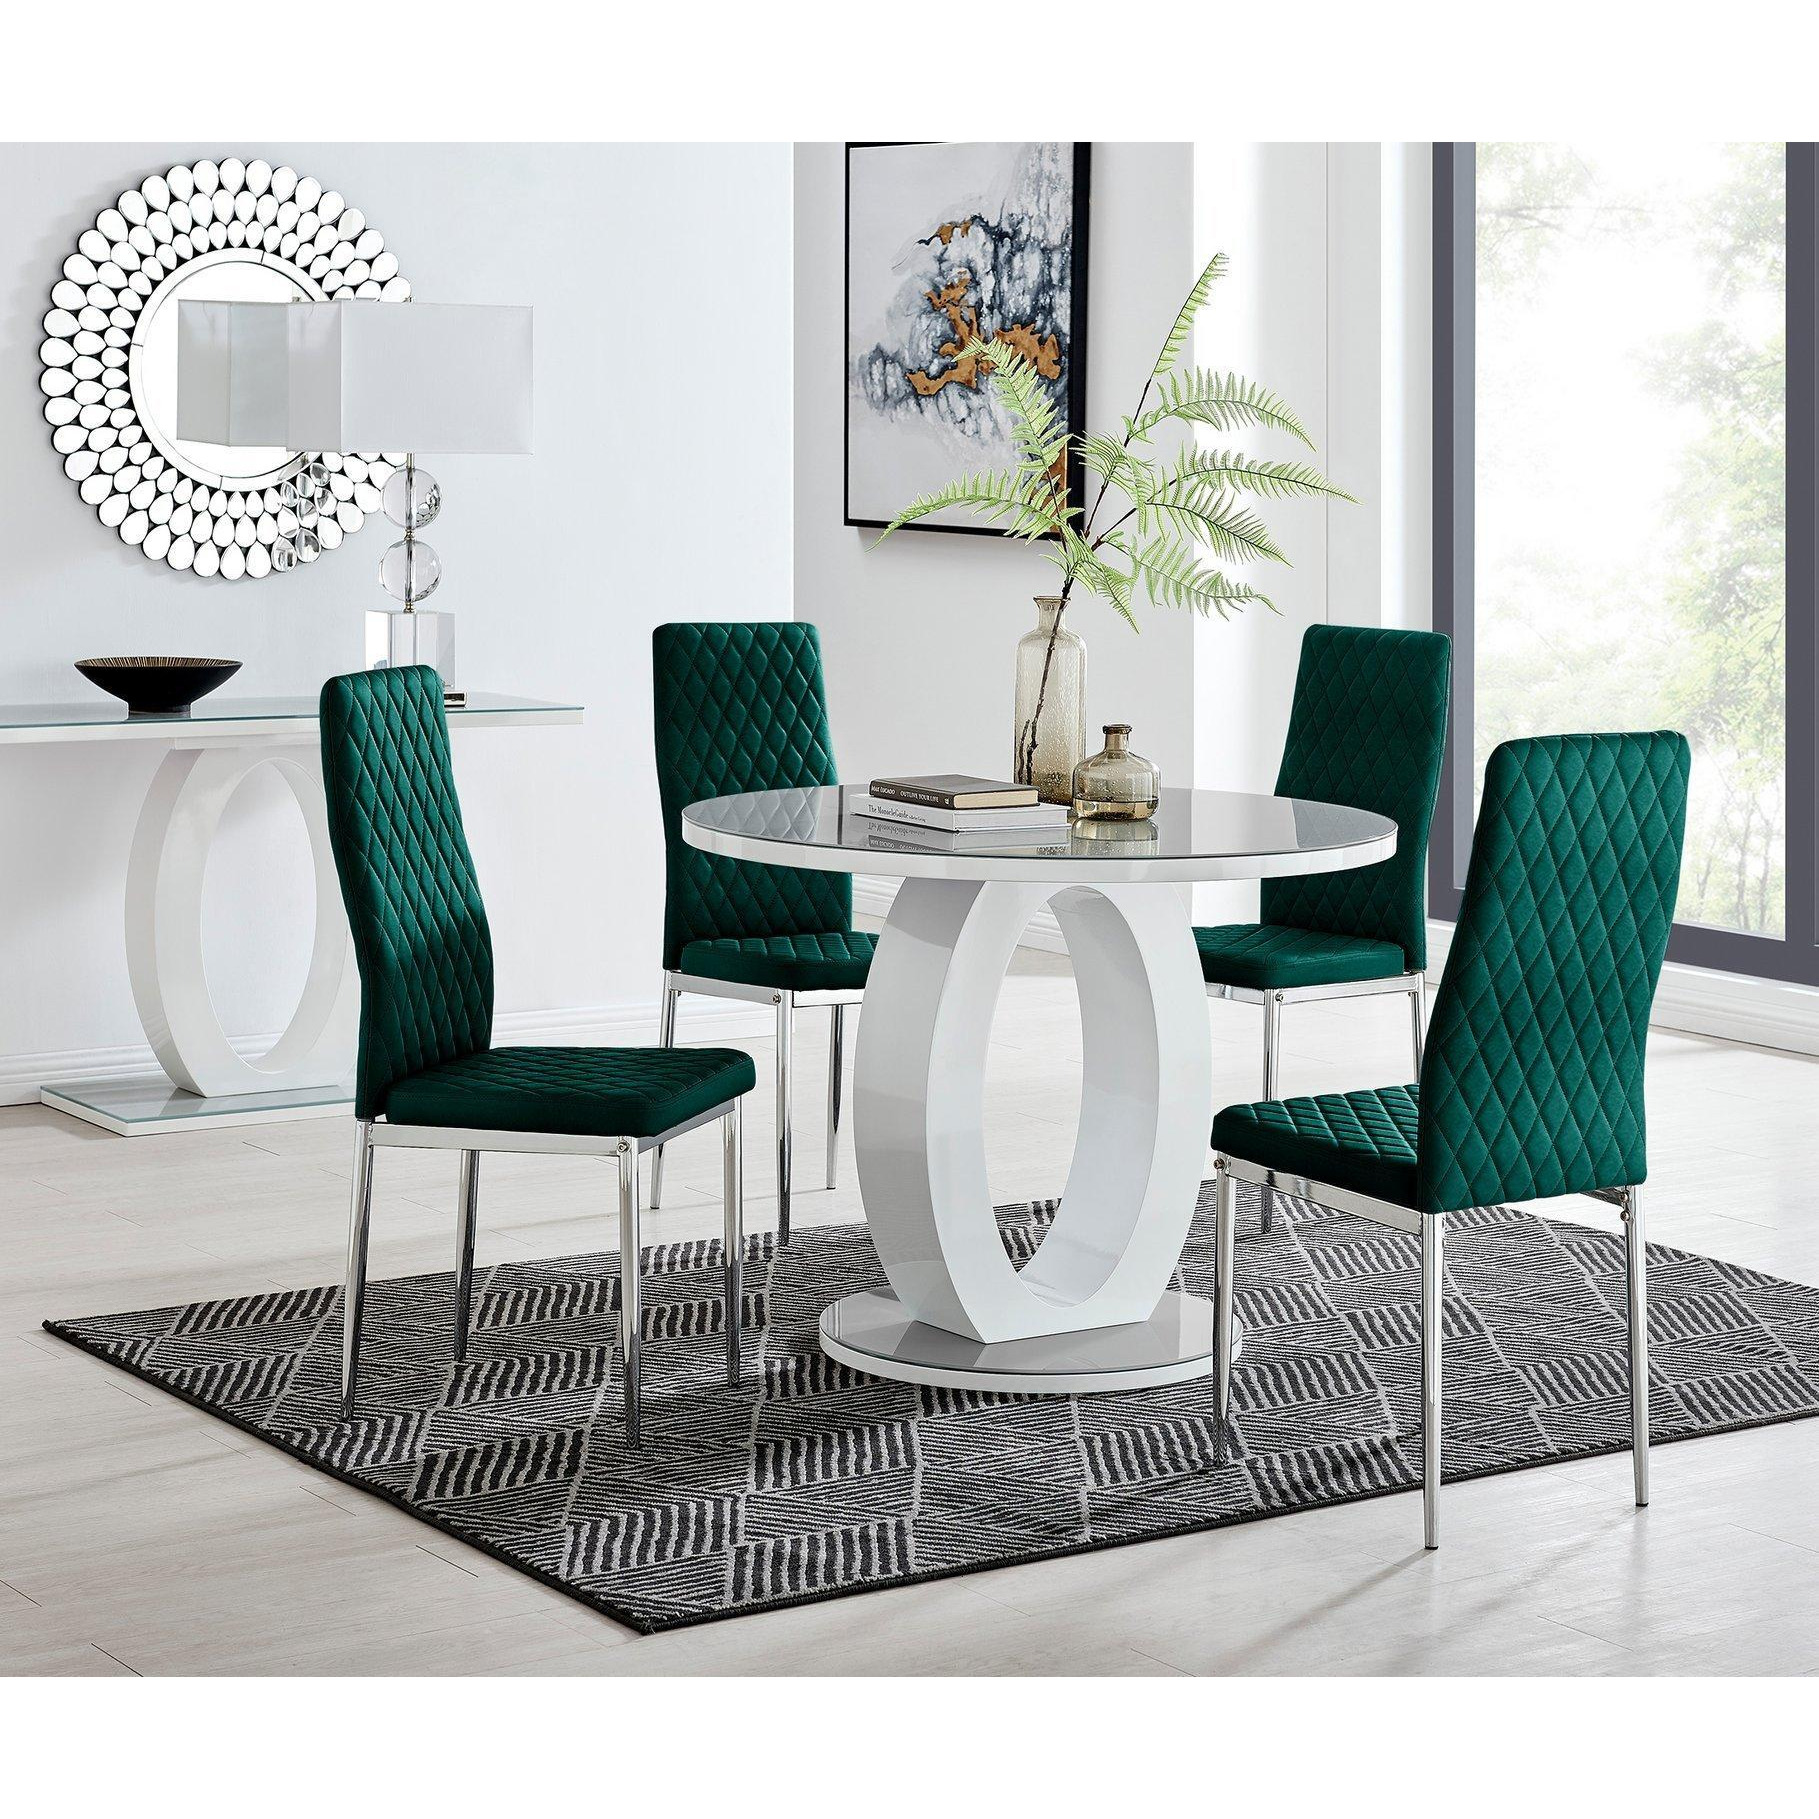 Giovani Round 4 Seat 100cm White High Gloss Halo Base Grey Glass Top Dining Table 4 Soft Velvet Silver Leg Milan Chairs - image 1